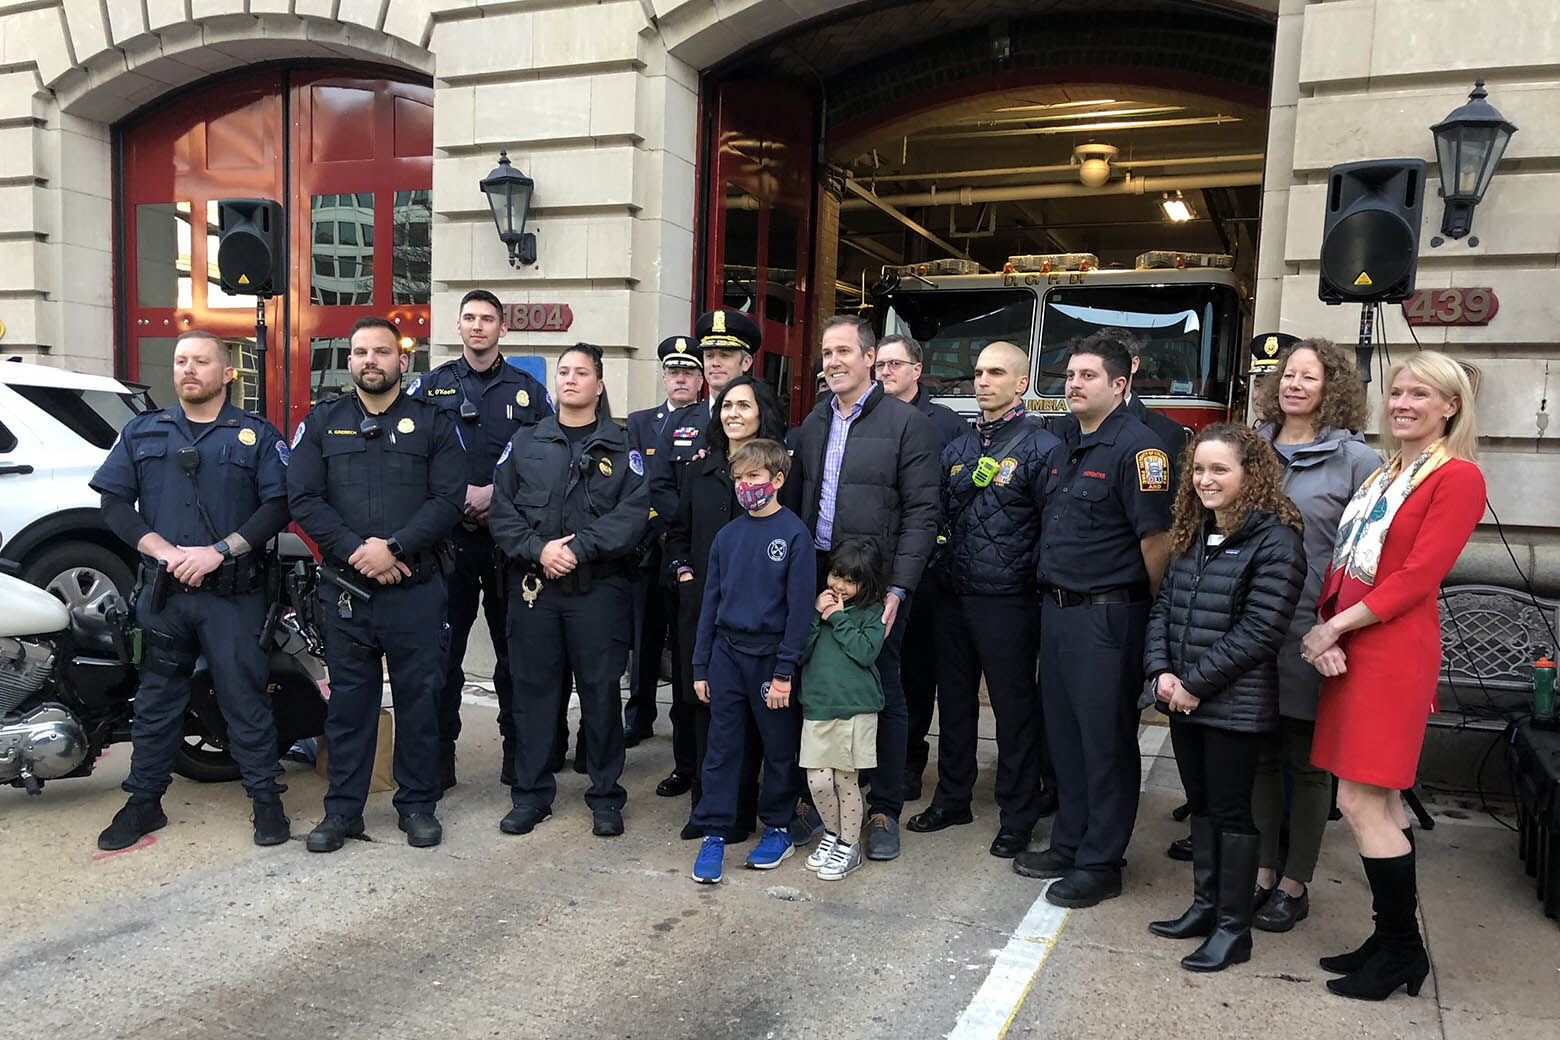 Group in front of firehouse